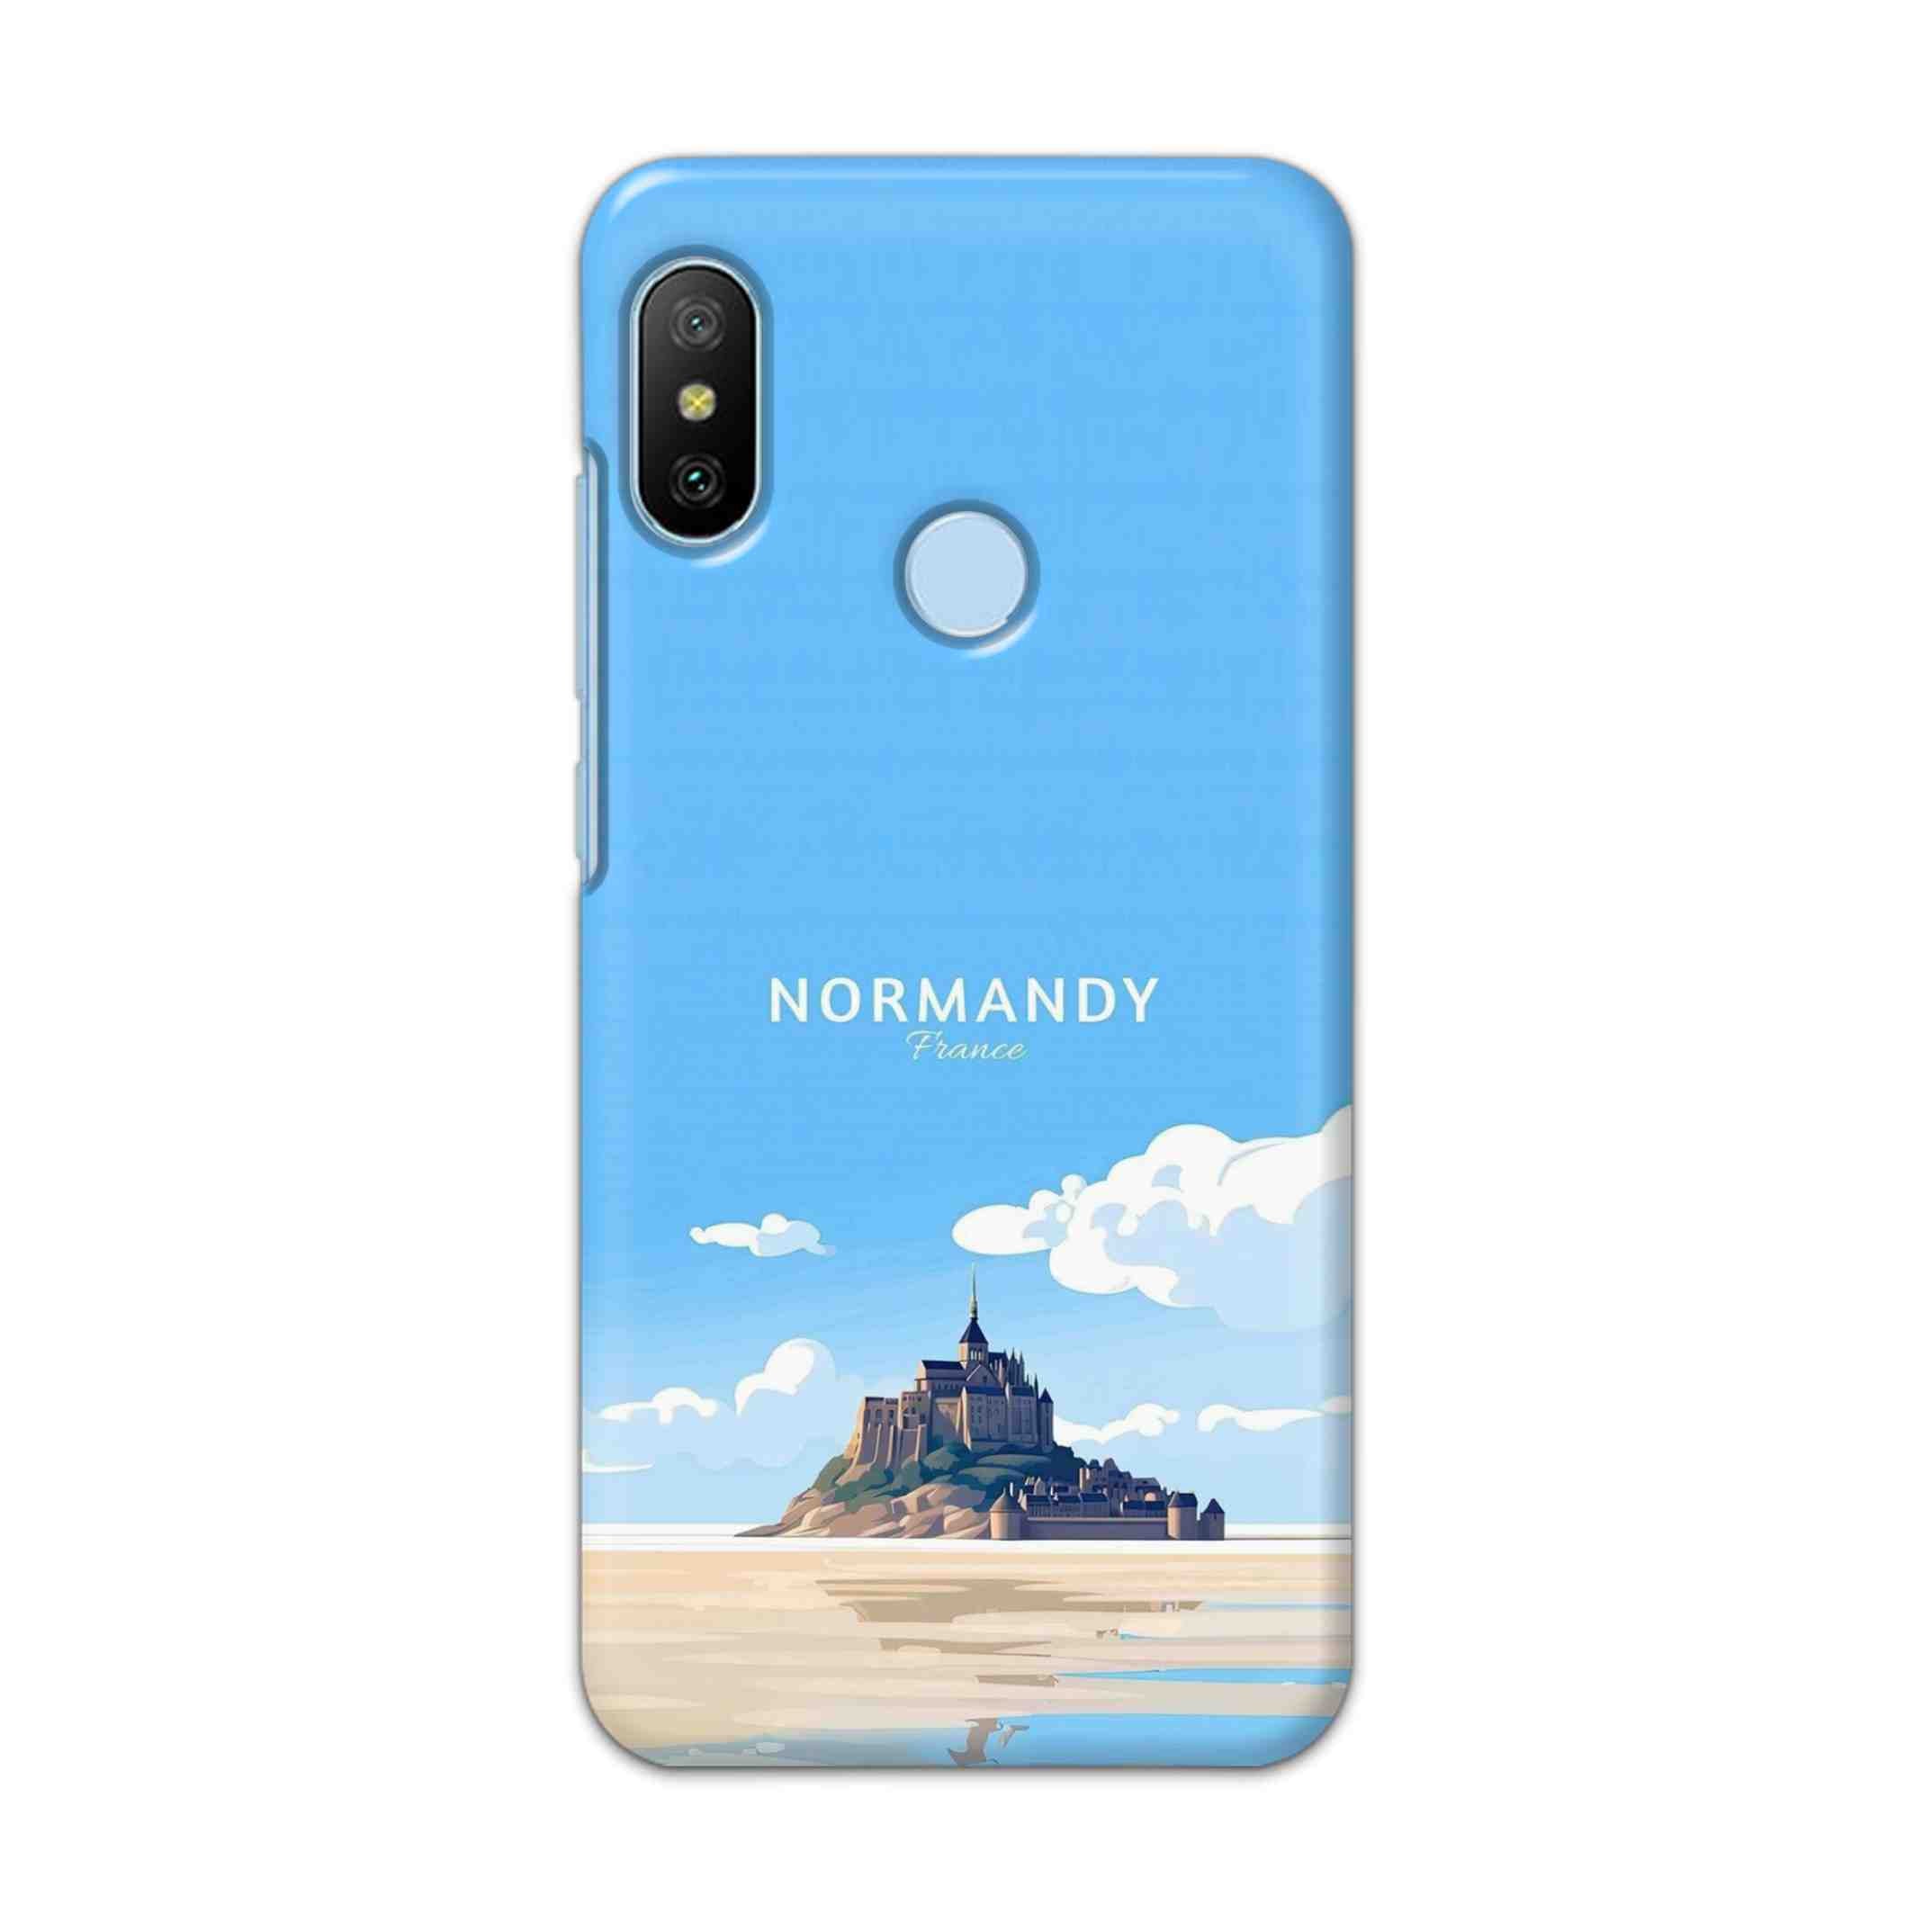 Buy Normandy Hard Back Mobile Phone Case/Cover For Xiaomi Redmi 6 Pro Online